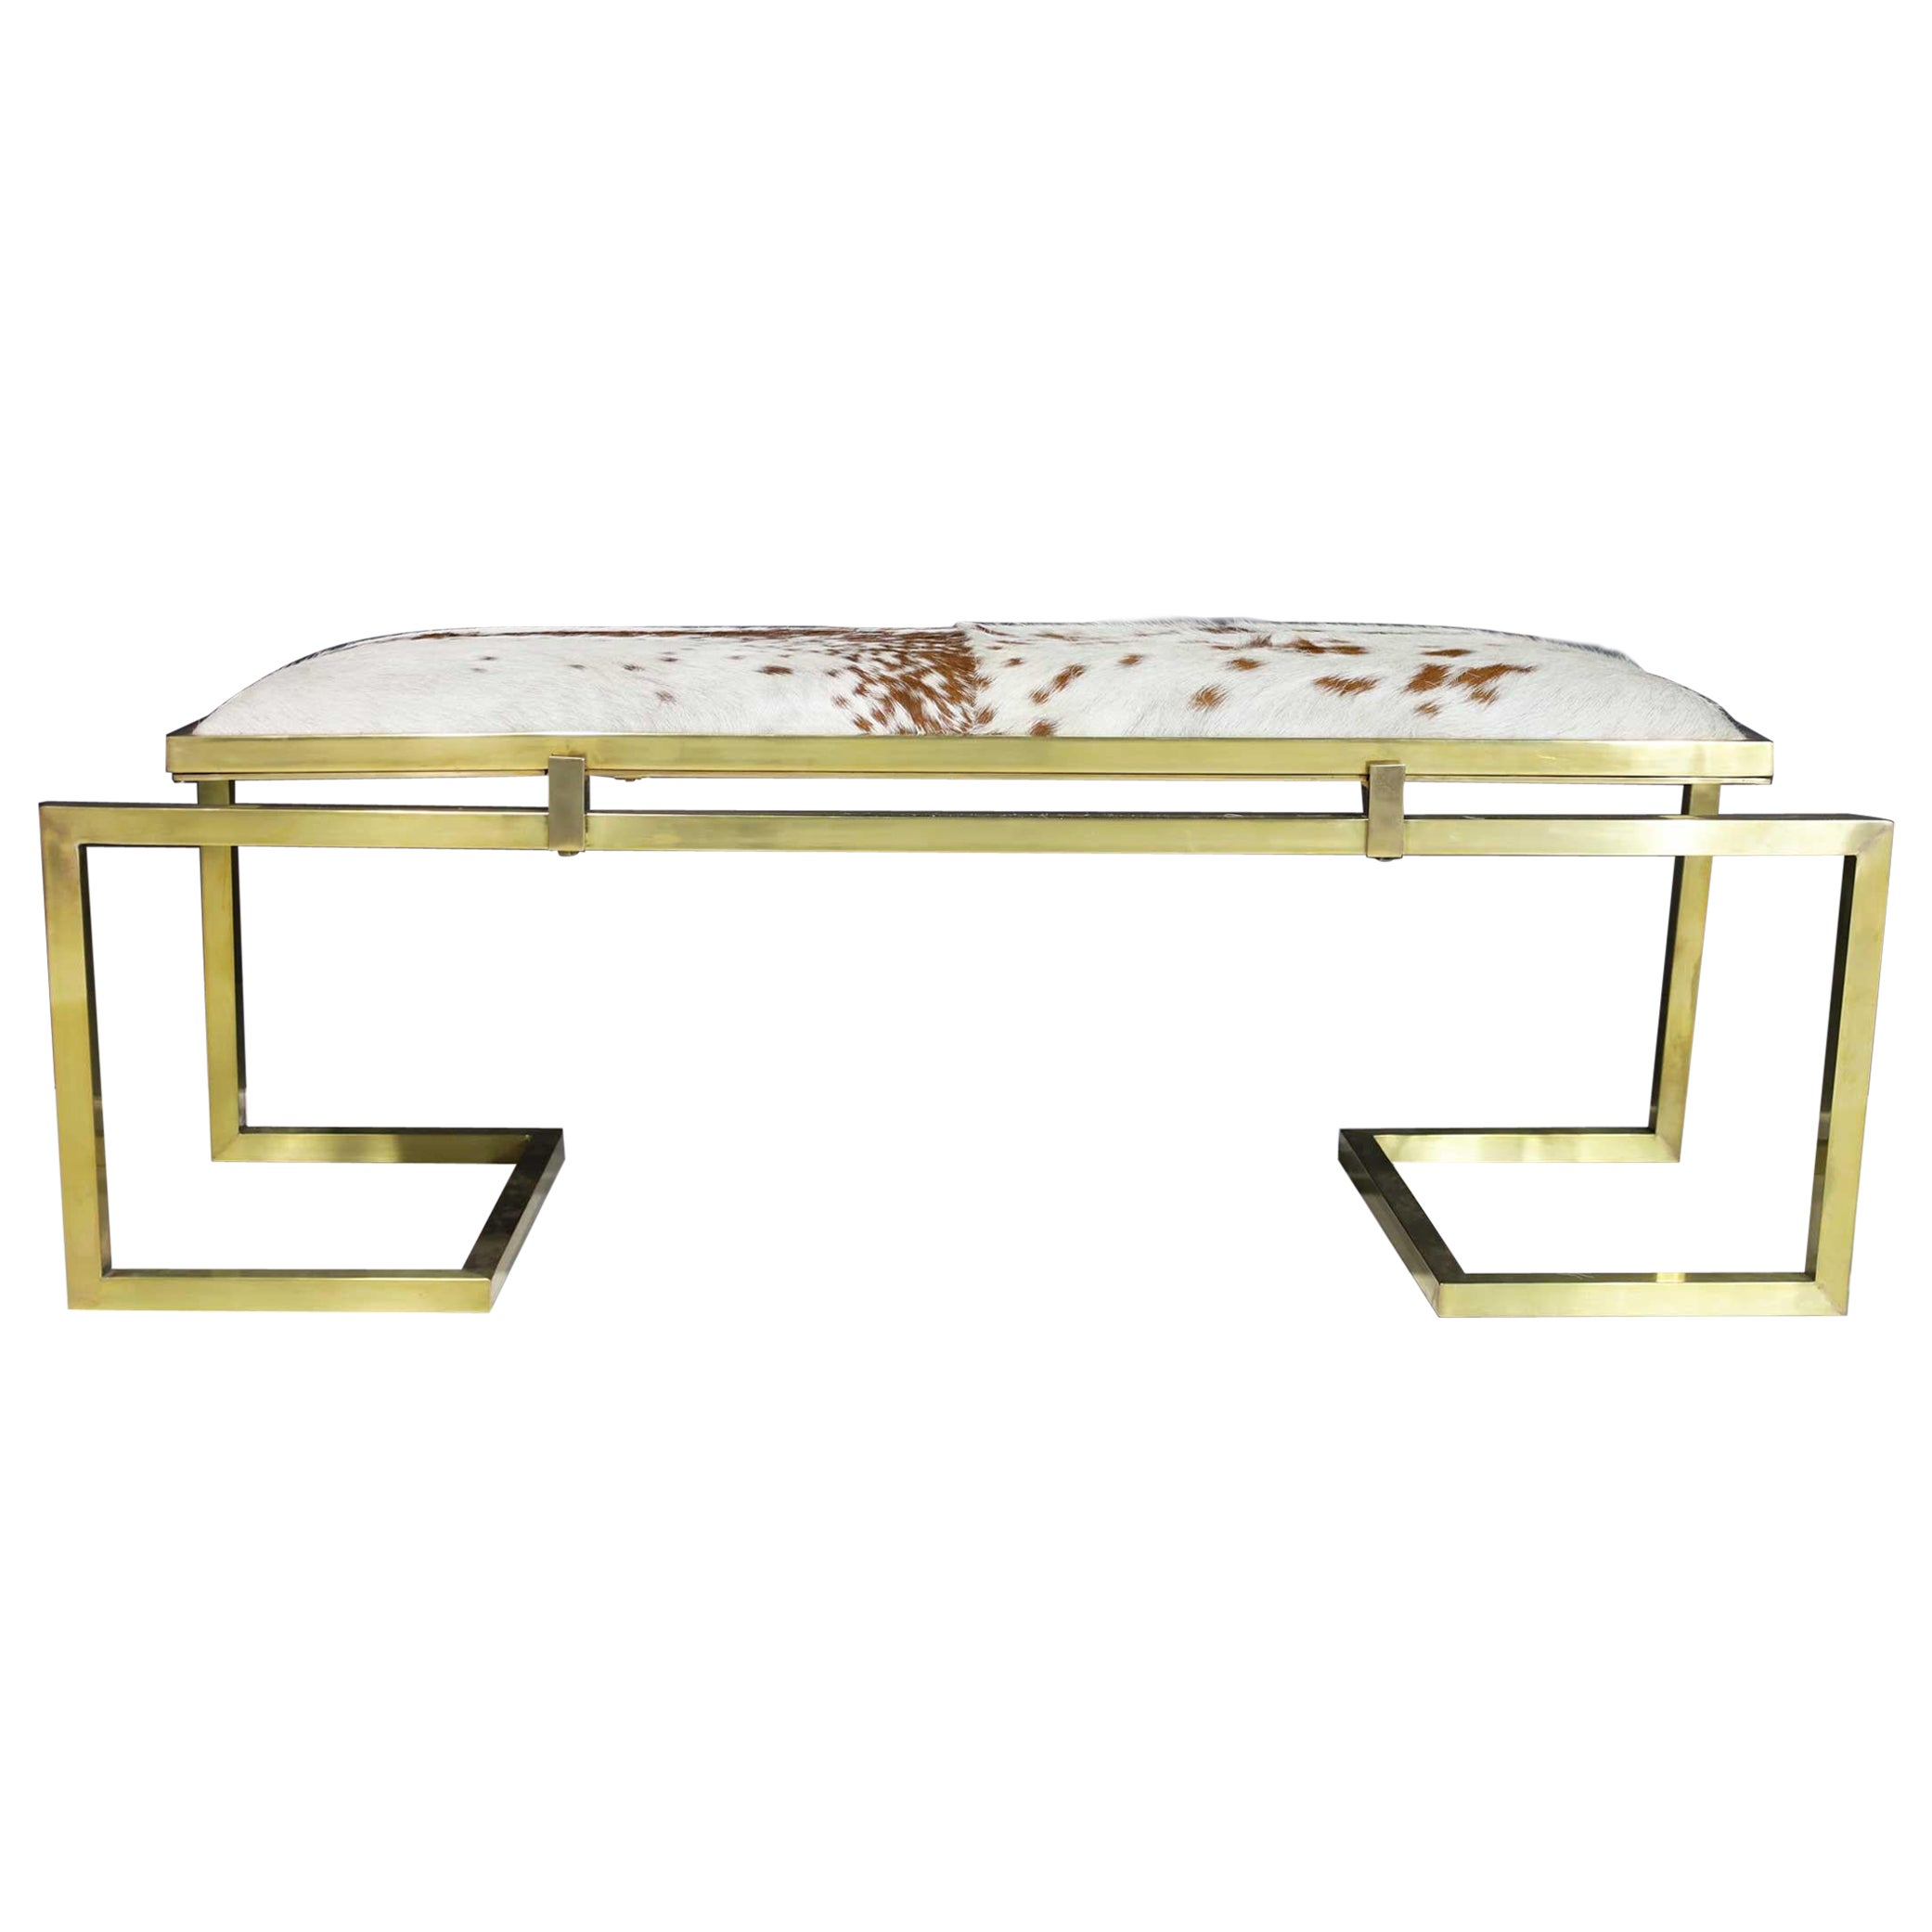 Scala Luxury "Clasp" Bench in Soild Brass and Hair on Hide Upholstery For Sale